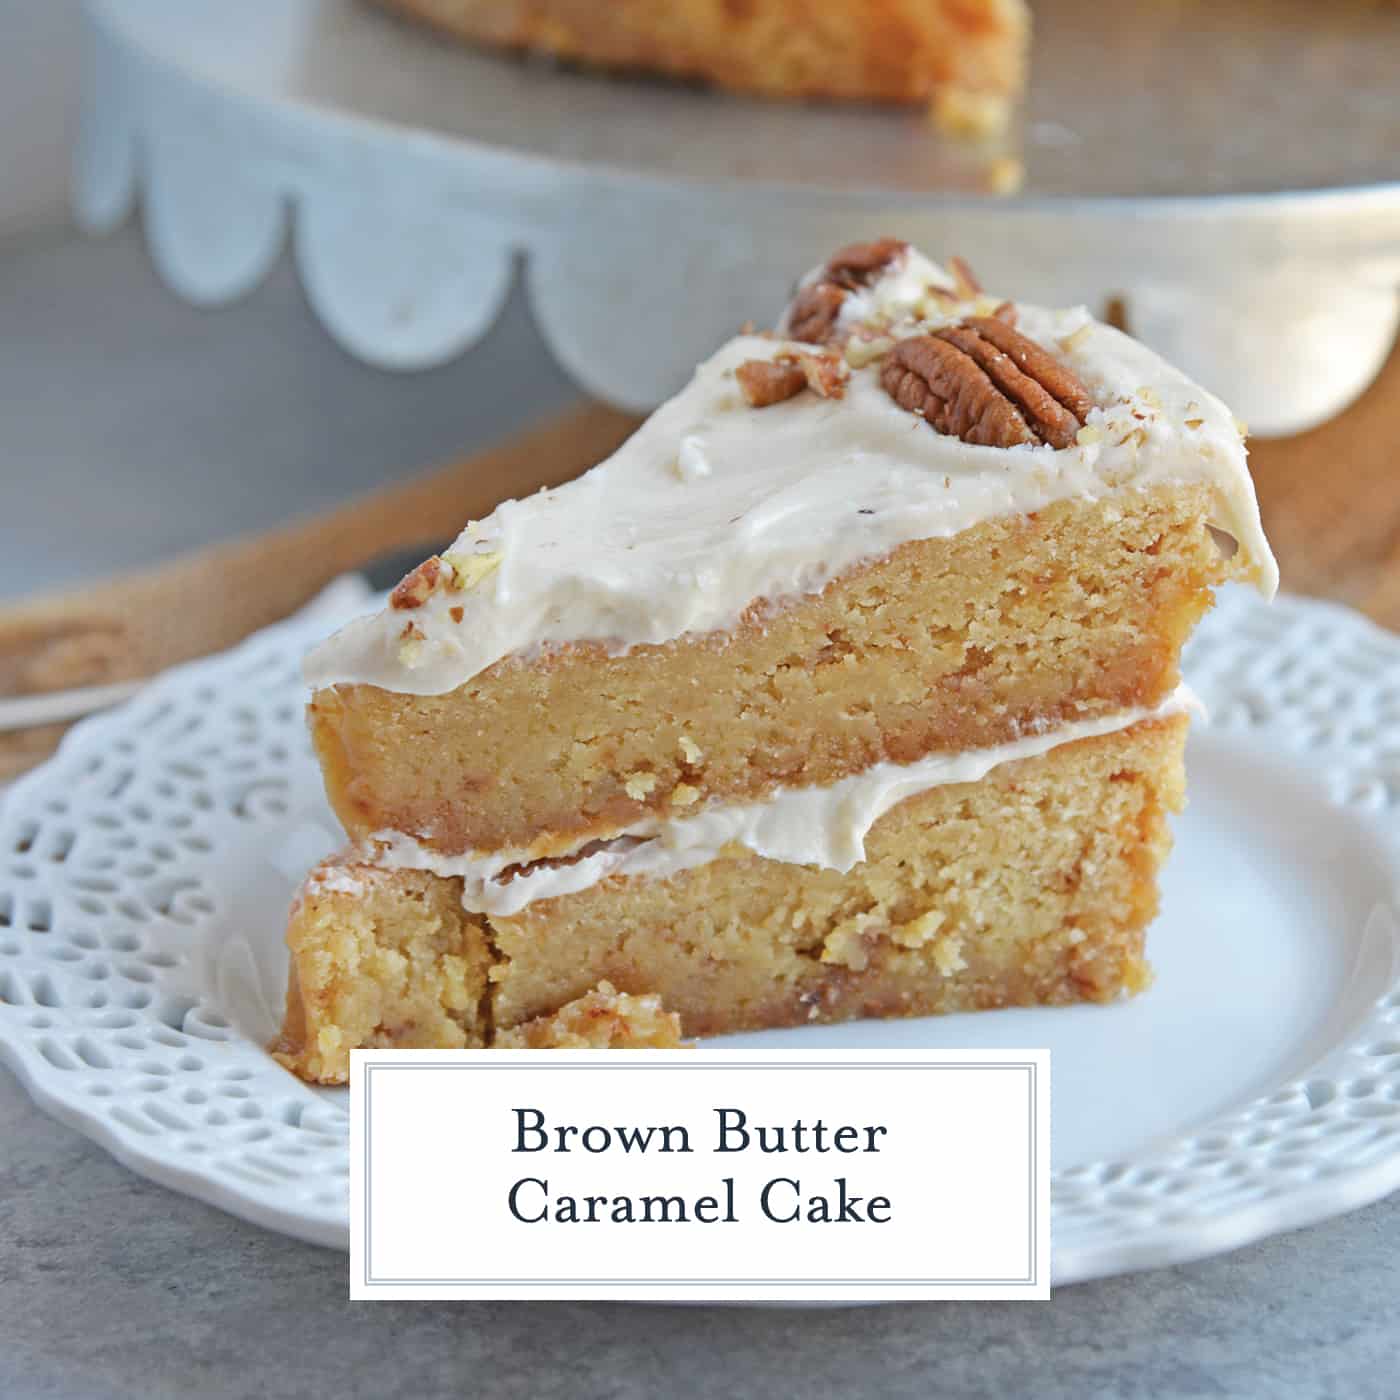  Brown Butter Caramel Cake is a two layer naked cake made with toffee bits and salted caramel frosting! The perfect summer cake or show stopping centerpiece. #caramelcake #brownbuttercake #nakedcakes www.savoryexperiments.com